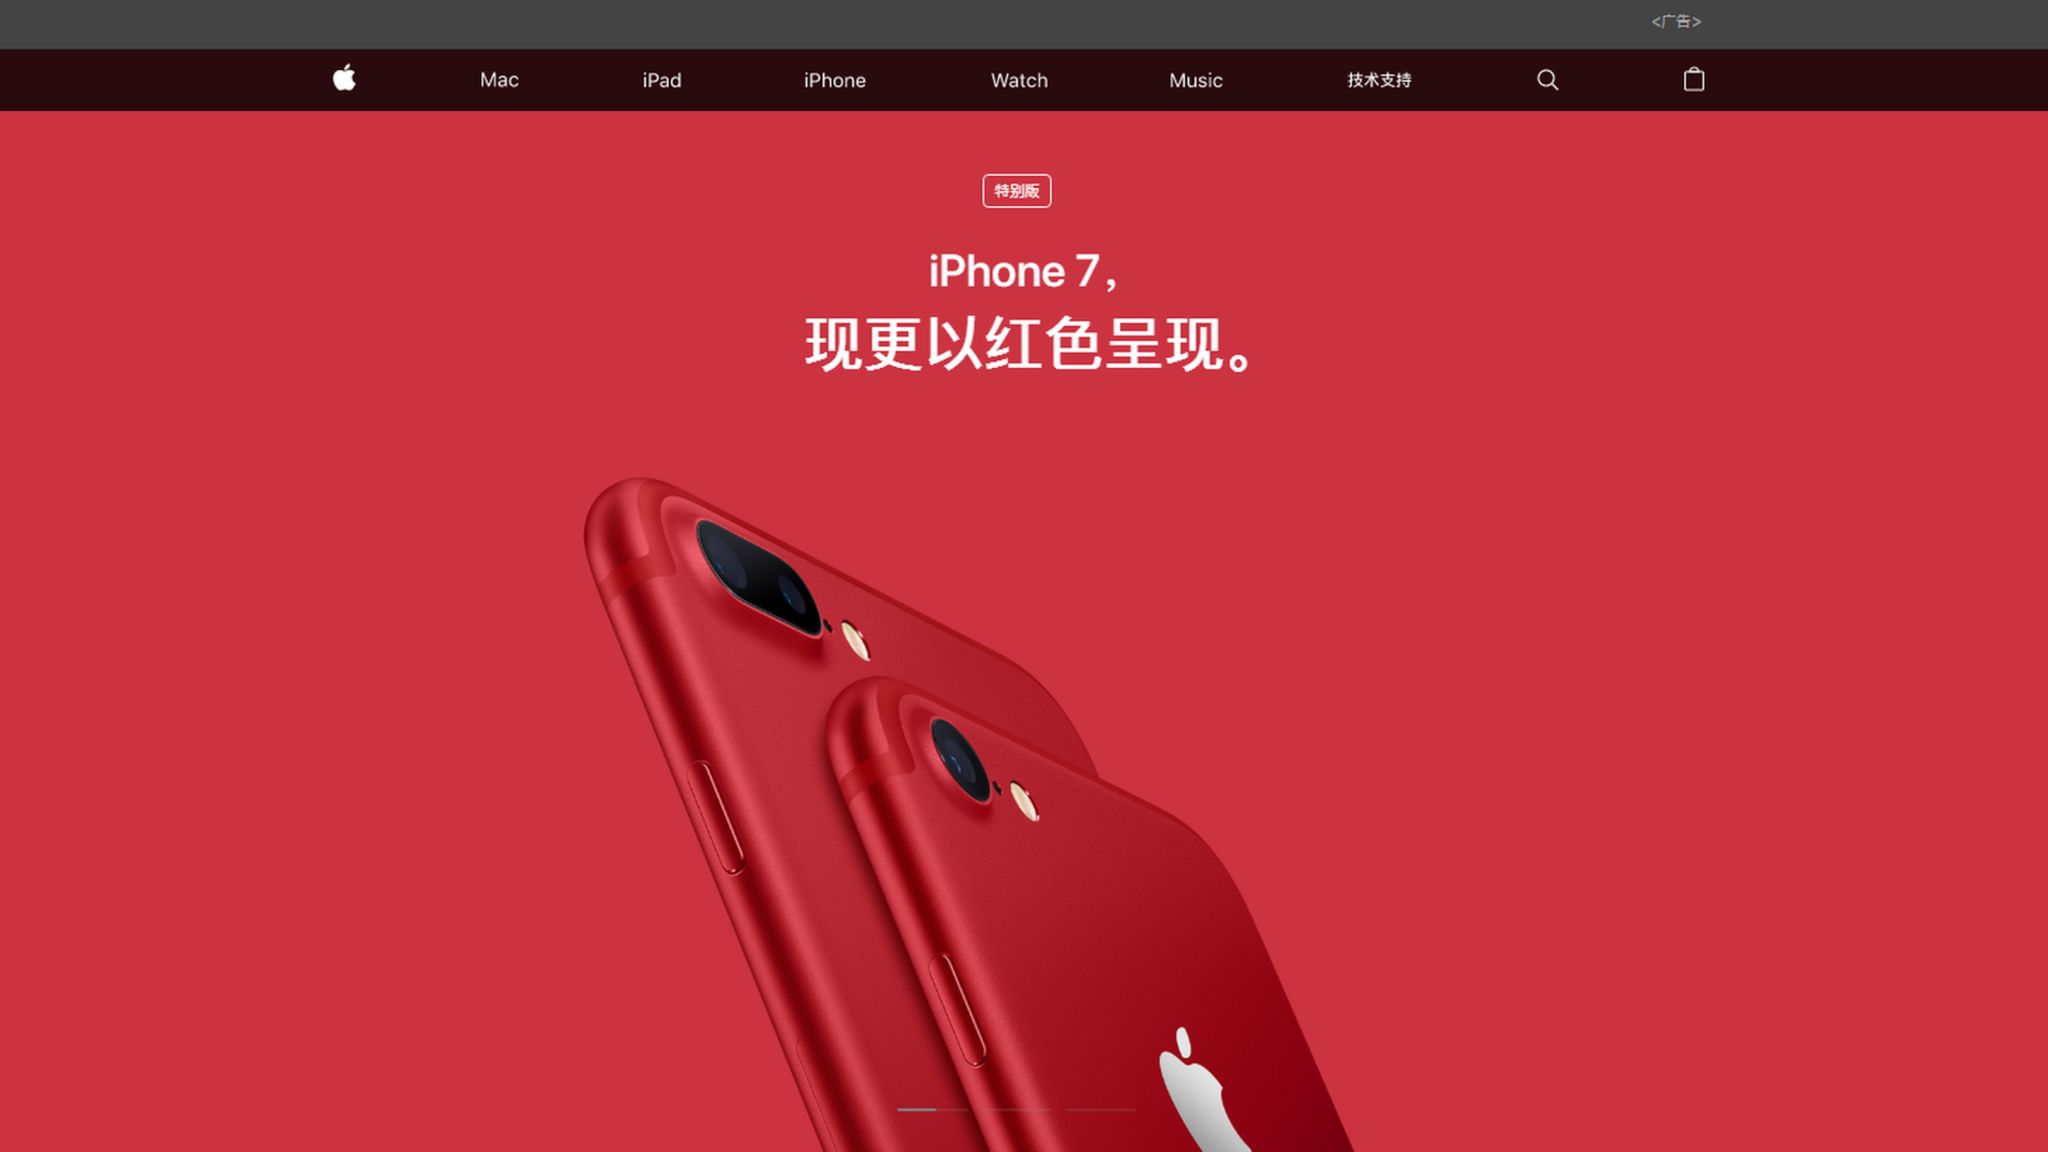 Screengrab from Apple's China website